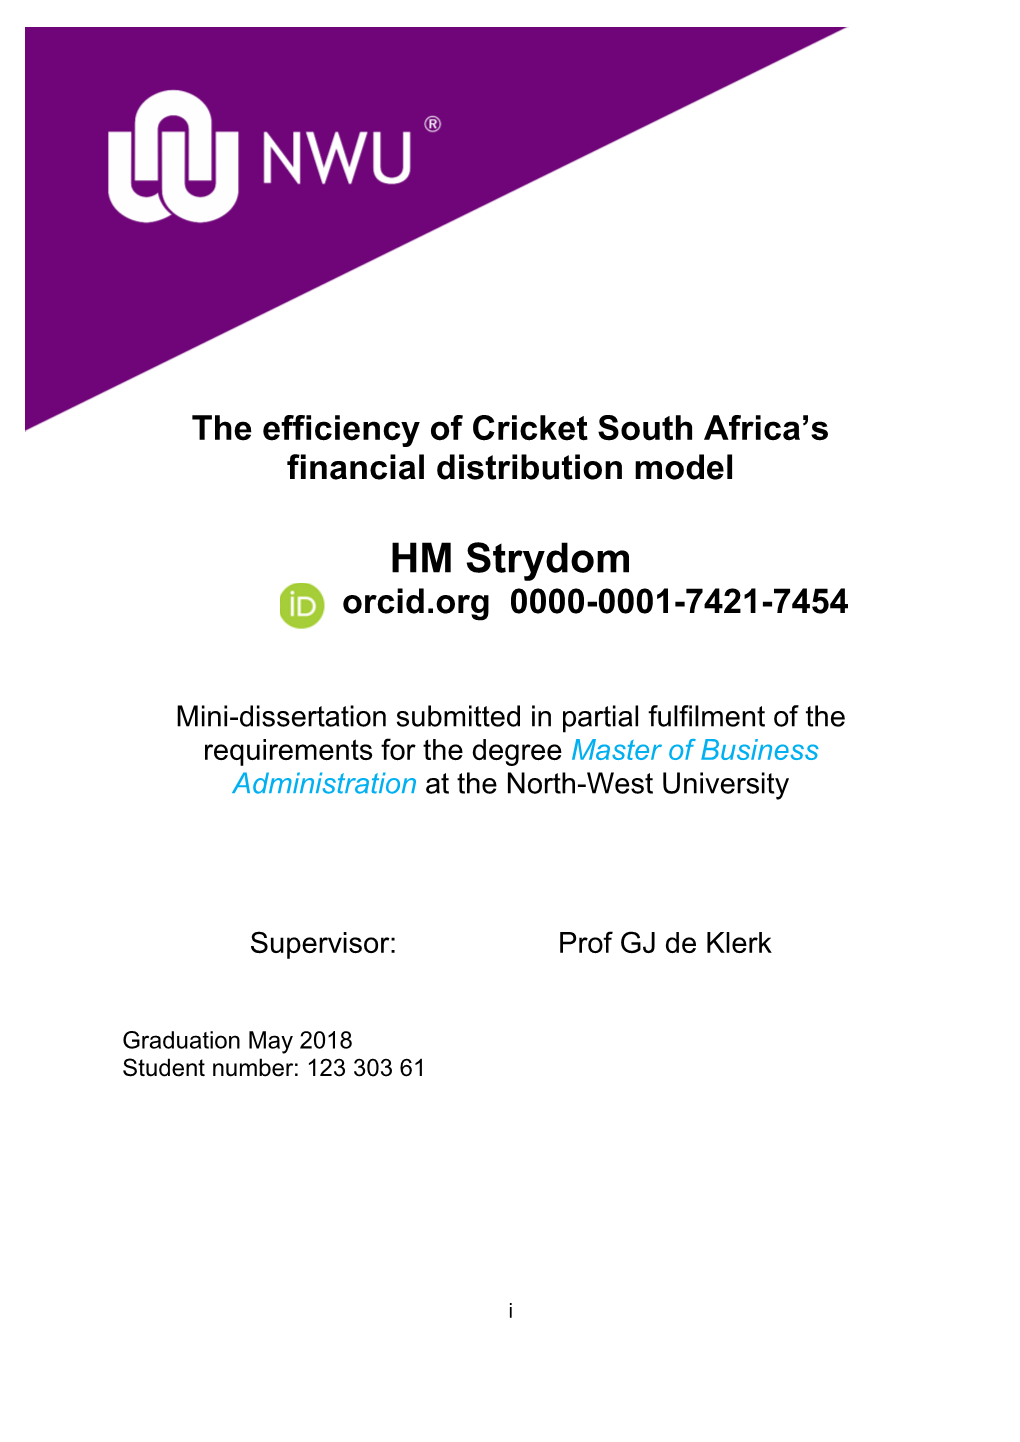 The Efficiency of Cricket South Africa's Financial Distribution Model